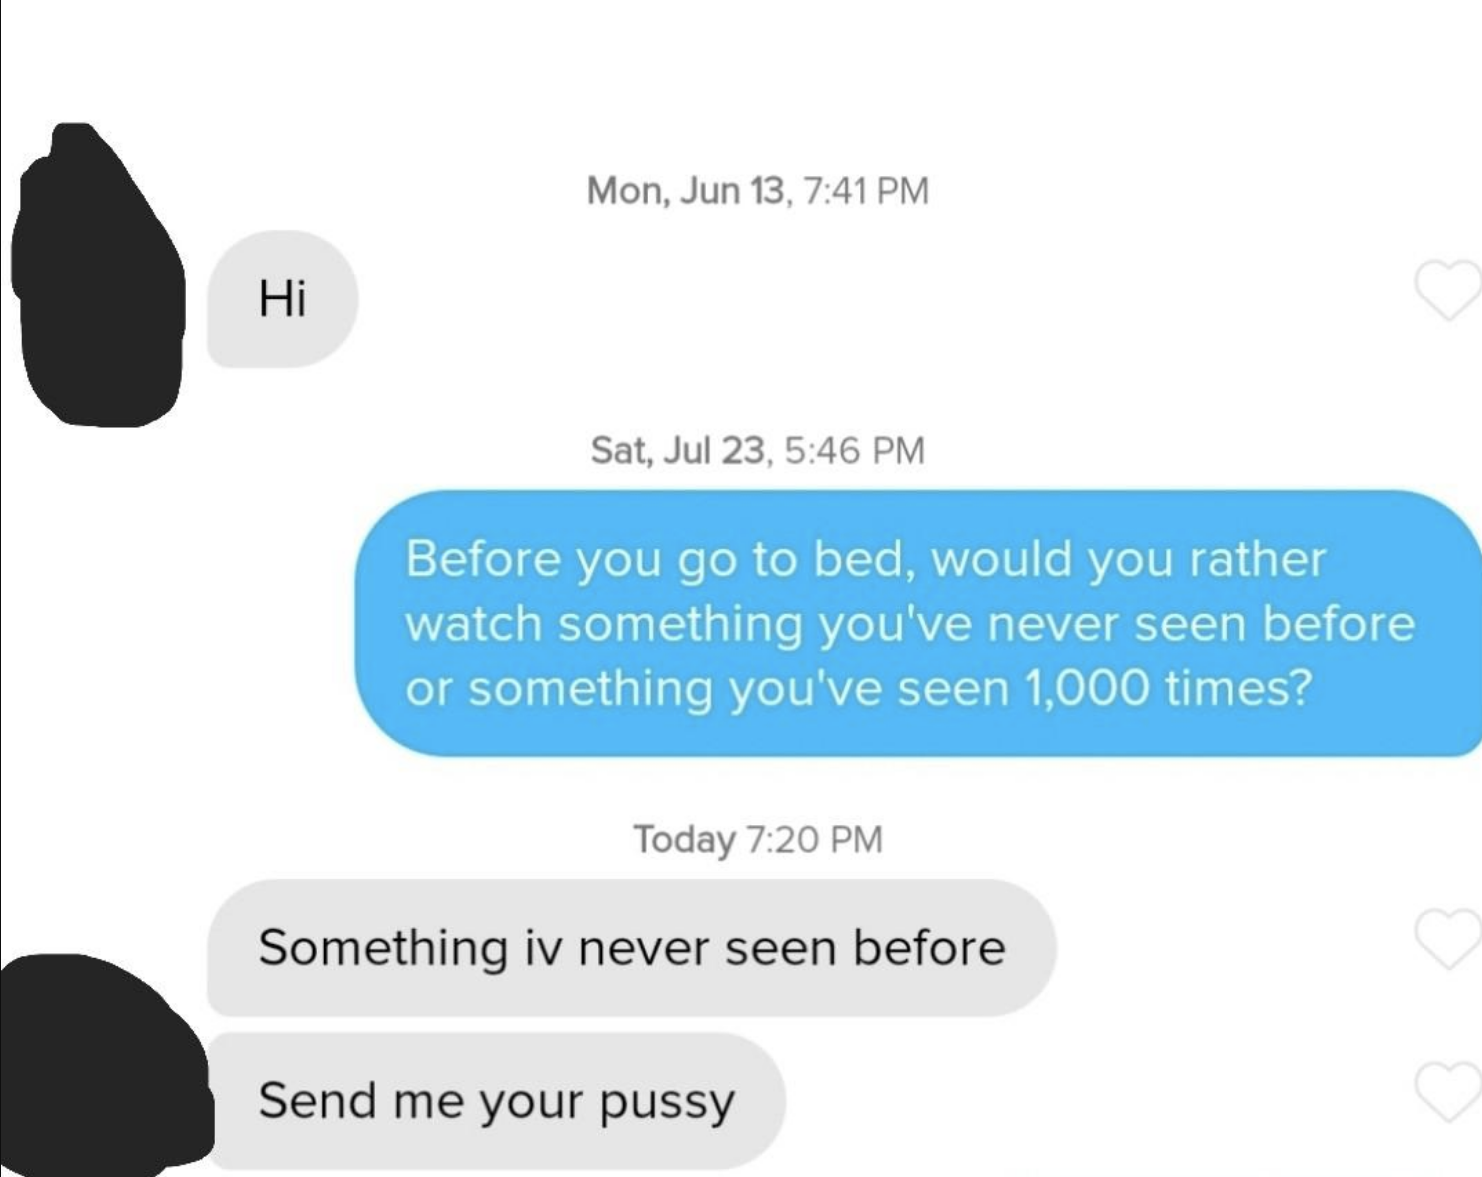 &quot;Before you go to bed, would you rather watch something you&#x27;ve never seen before or something you&#x27;ve seen 1,000 times?&quot; &quot;Something I&#x27;ve never seen before&quot;; &quot;Send me your pussy&quot;